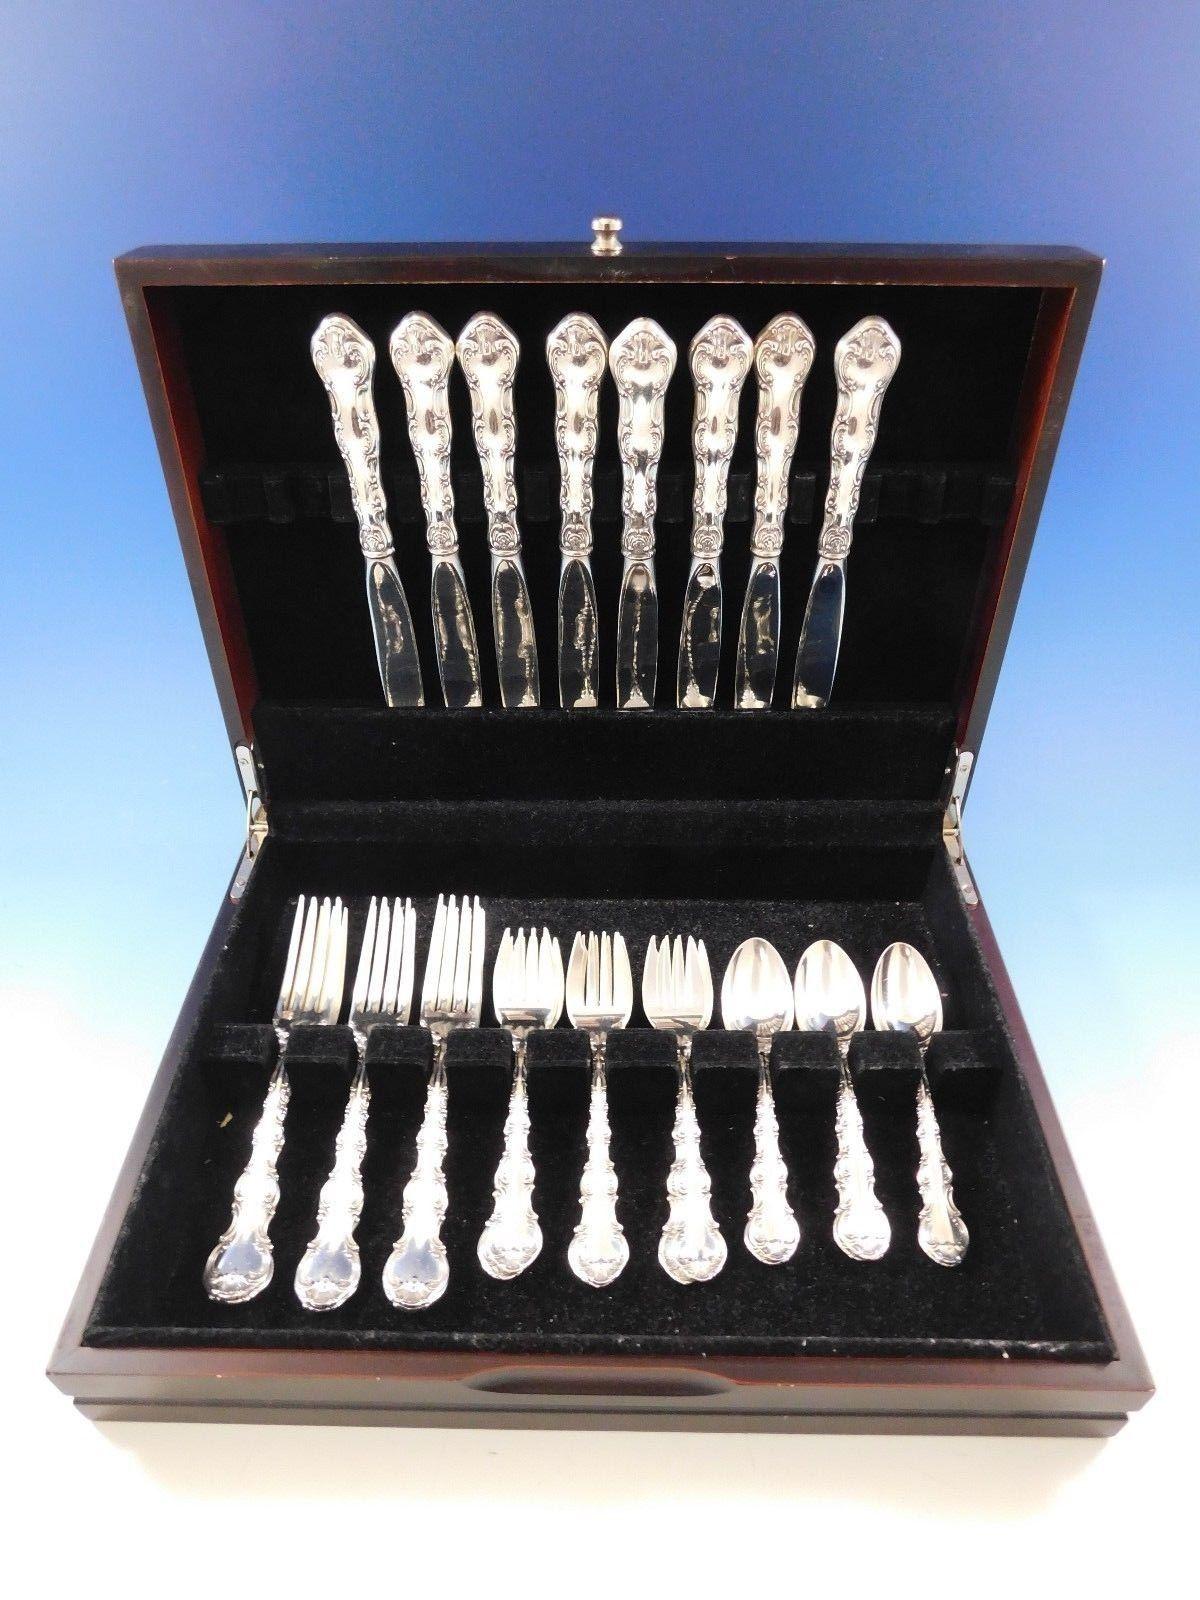 Dinner size Strasbourg by Gorham sterling silver flatware set of 32 pieces. This set includes:

8 dinner knives, 9 3/4